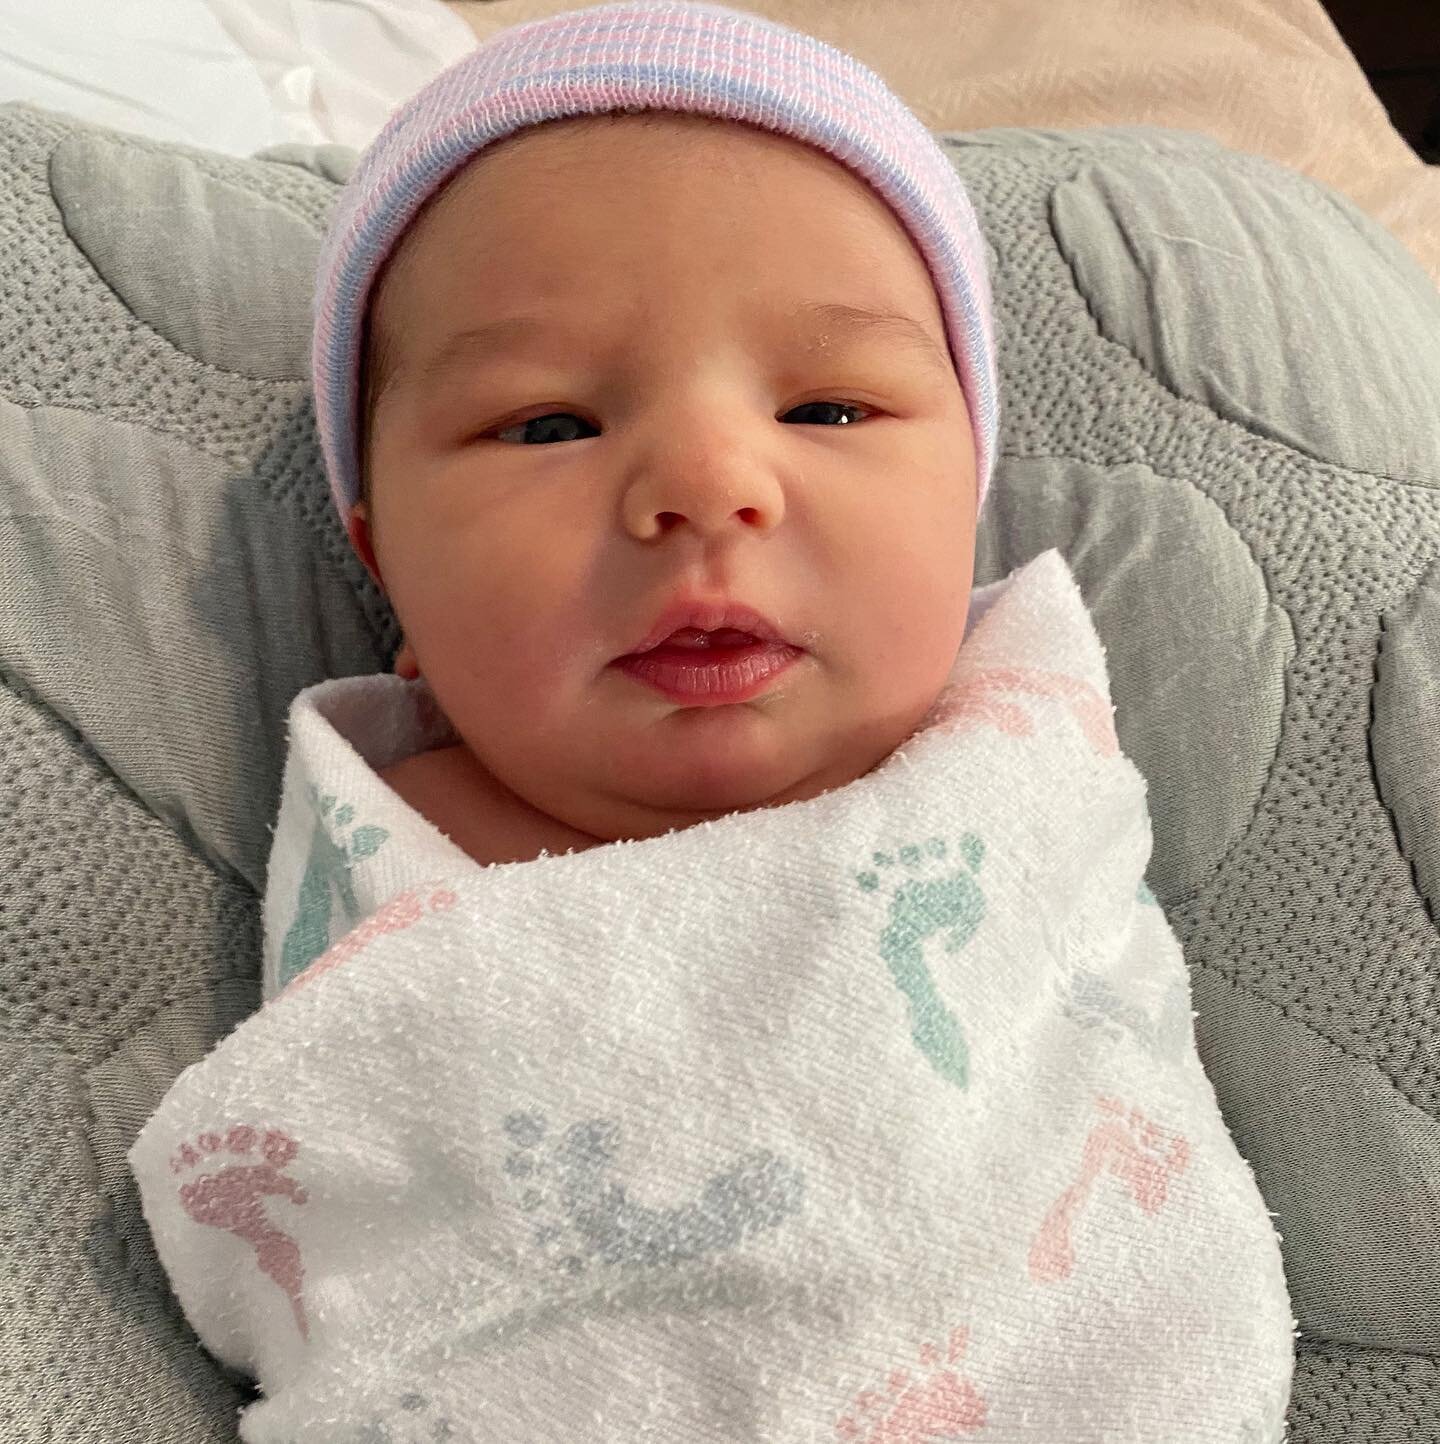 Meet Ty. 💛 8lbs of squish arrived to our house on 3/10. Named by big bro and sis, he is already spoiled. Swipe to see the inspiration &ldquo;poem&rdquo; Grant made for me while in the hospital. 🥰